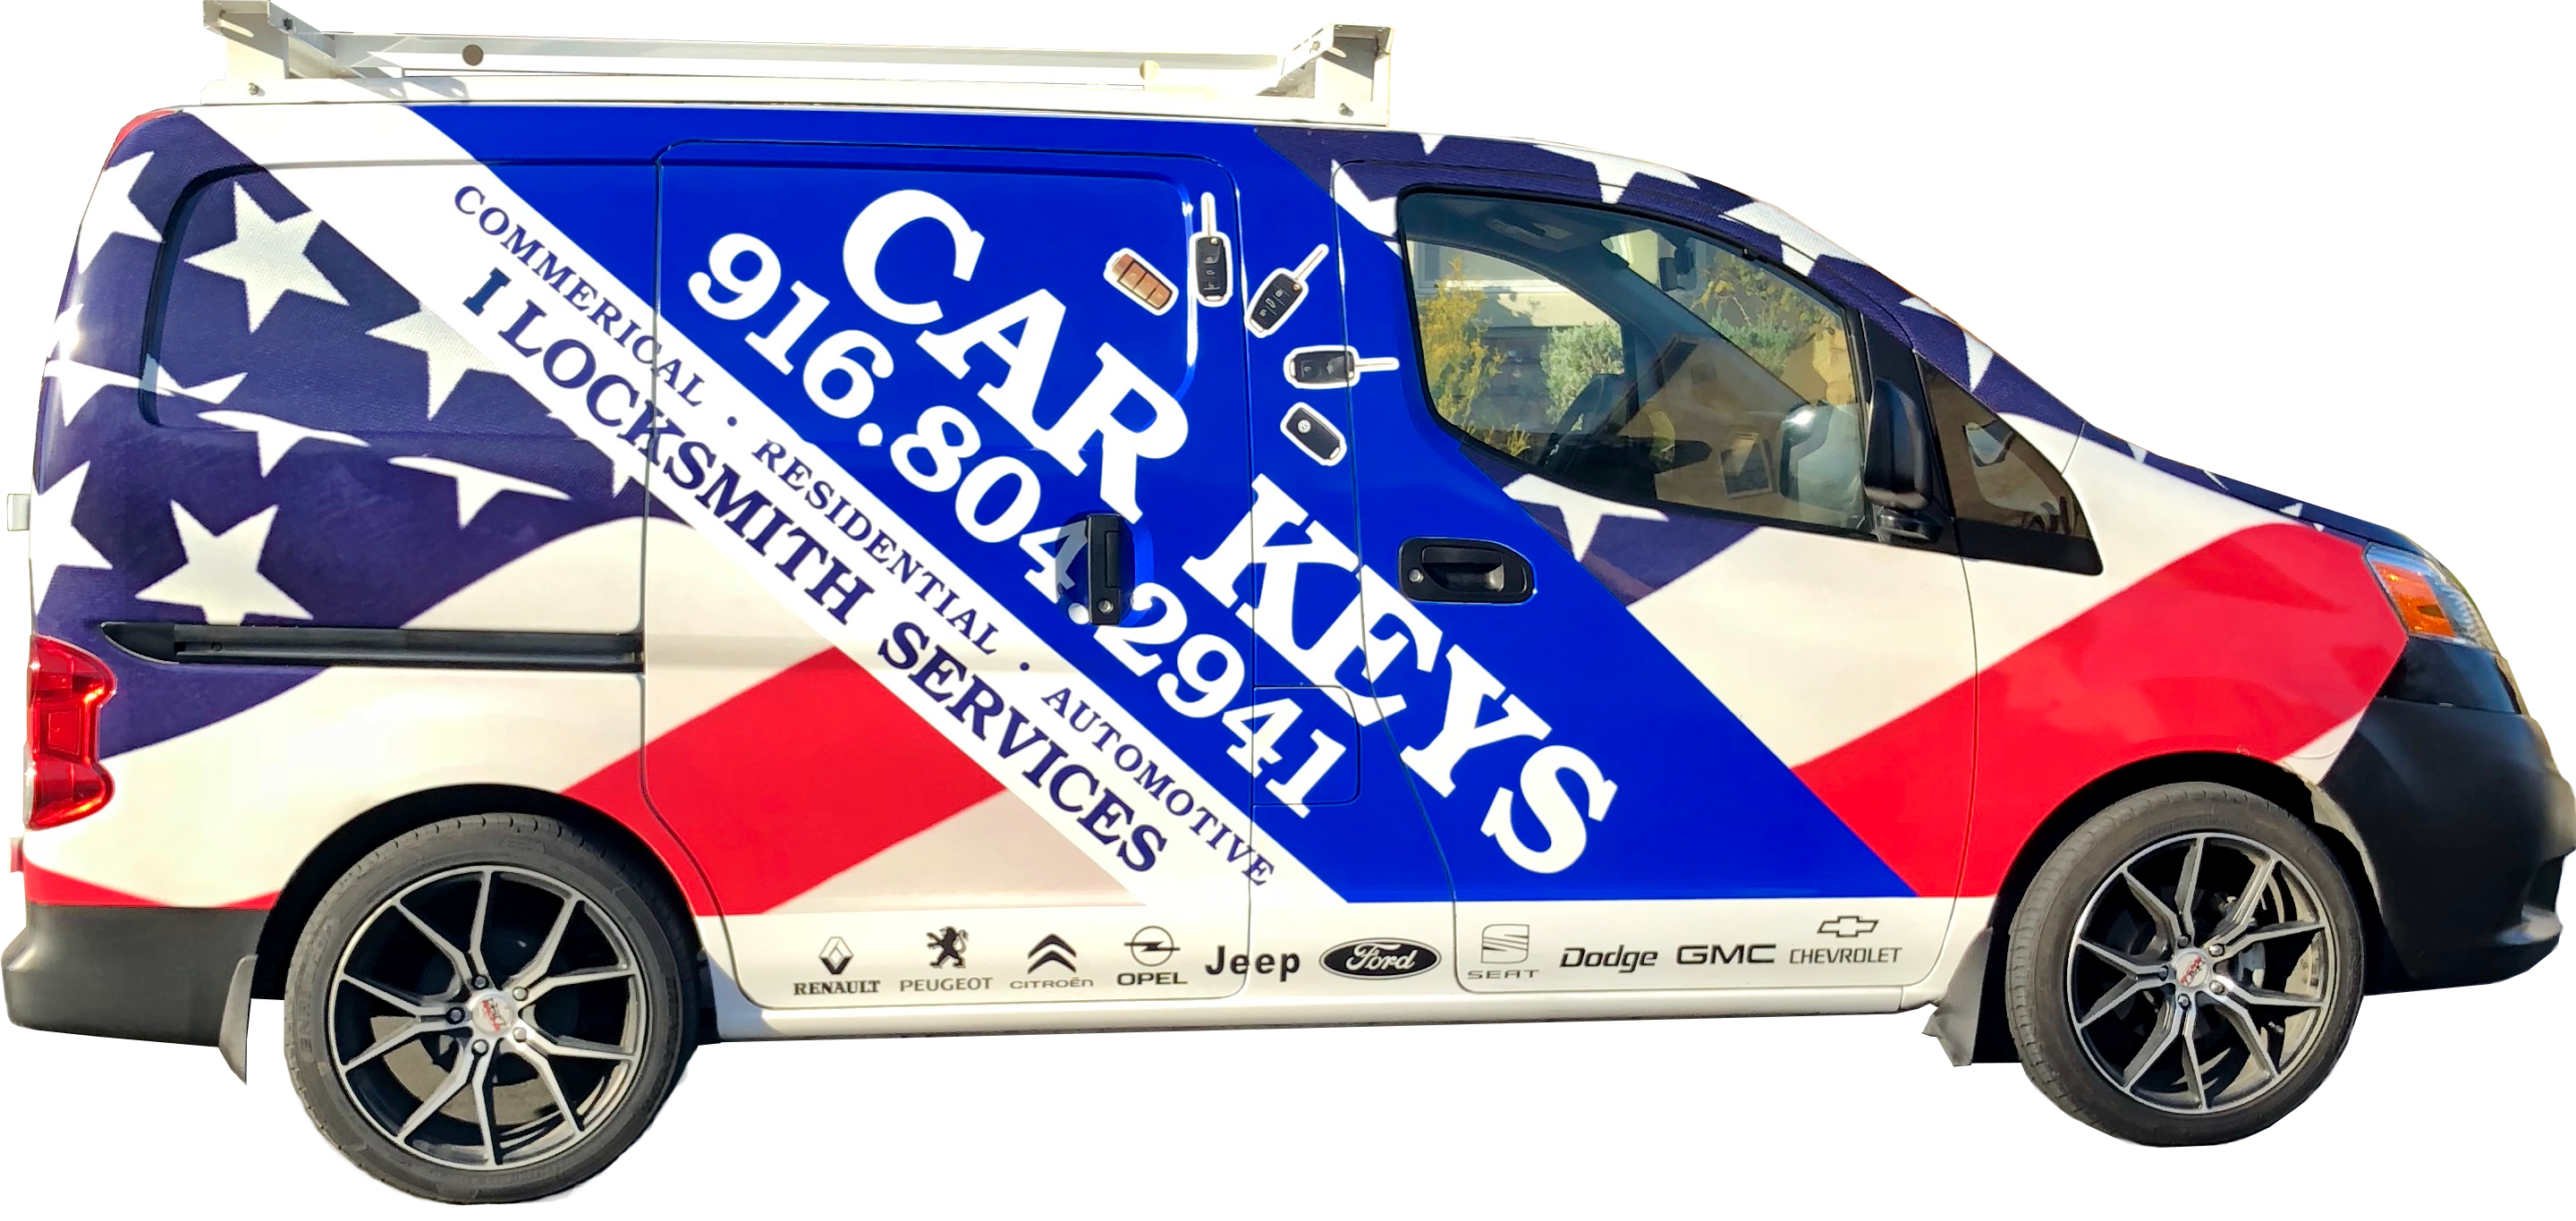 Key clipart locksmith. Home page auto business